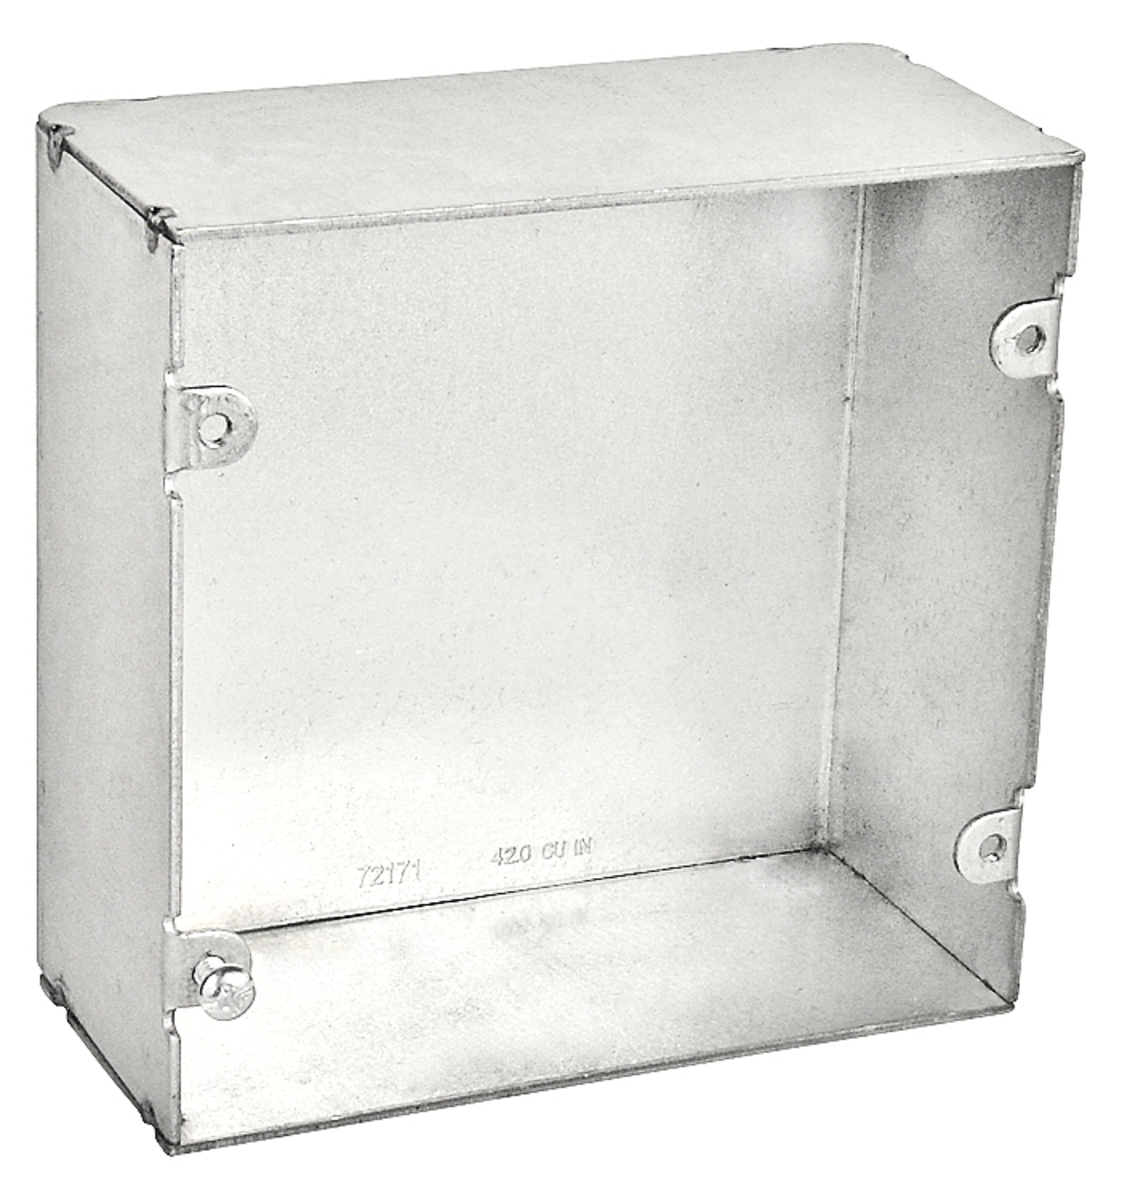 4-11/16" Square Box, 2-1/8" Deep - Welded, No Knockouts